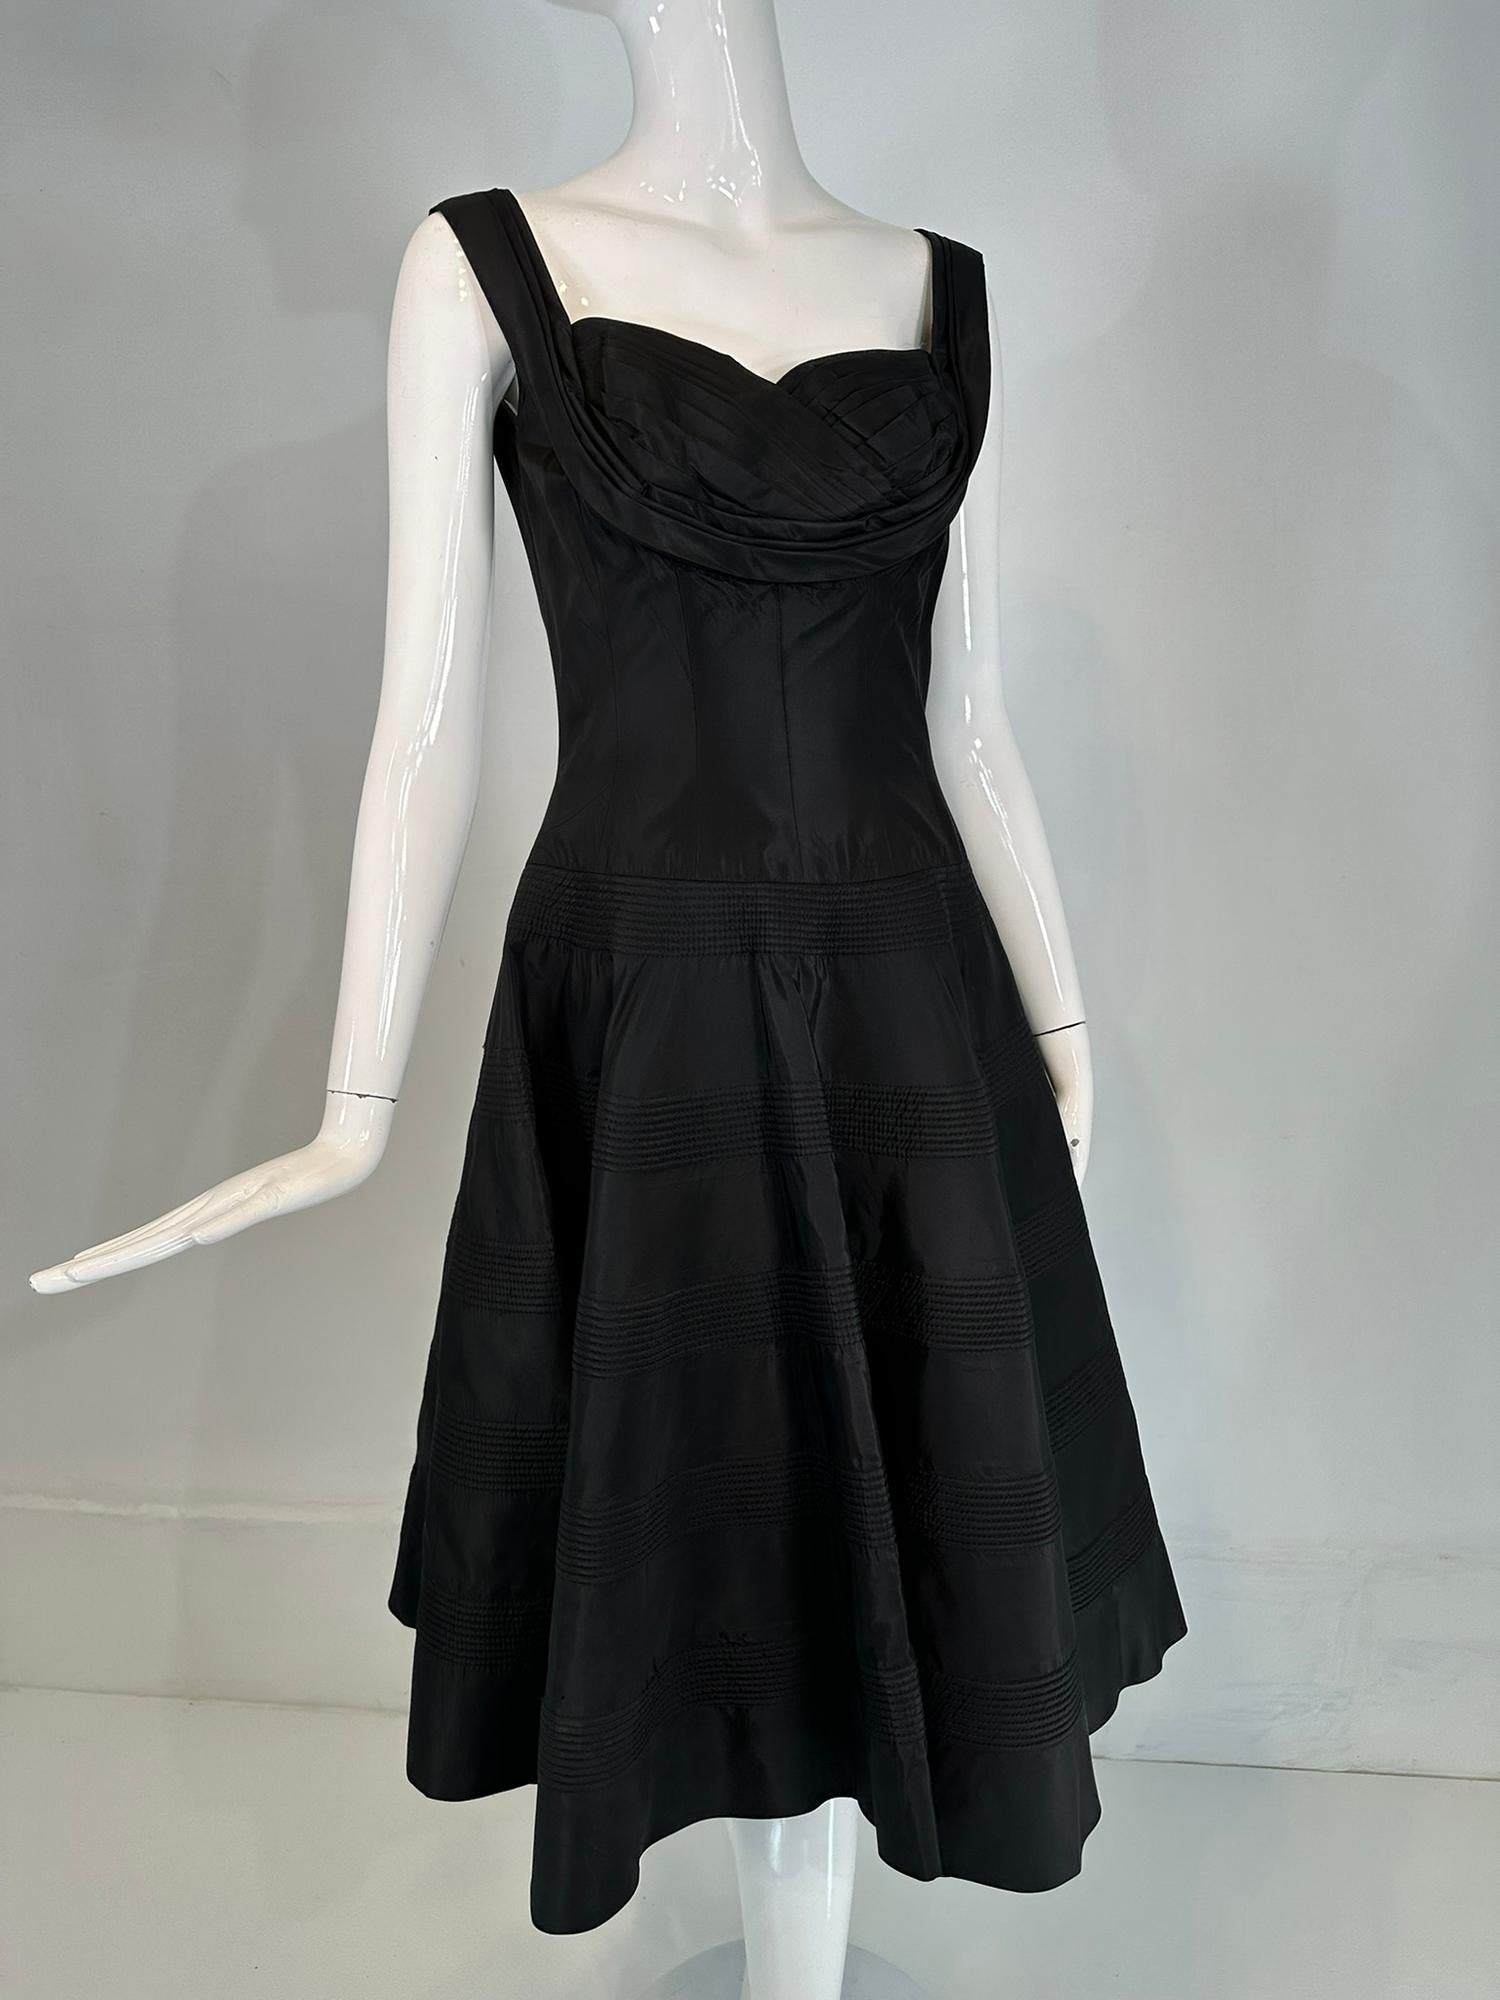 Fred Perlberg Dance Originals 1950s black taffeta scoop bodice quilted full circle skirt cocktail dress. Open scoop neckline sleeveless dress with pleated straps that hug the shoulder. The bodice is fitted, with a sweetheart neckline & V back. The